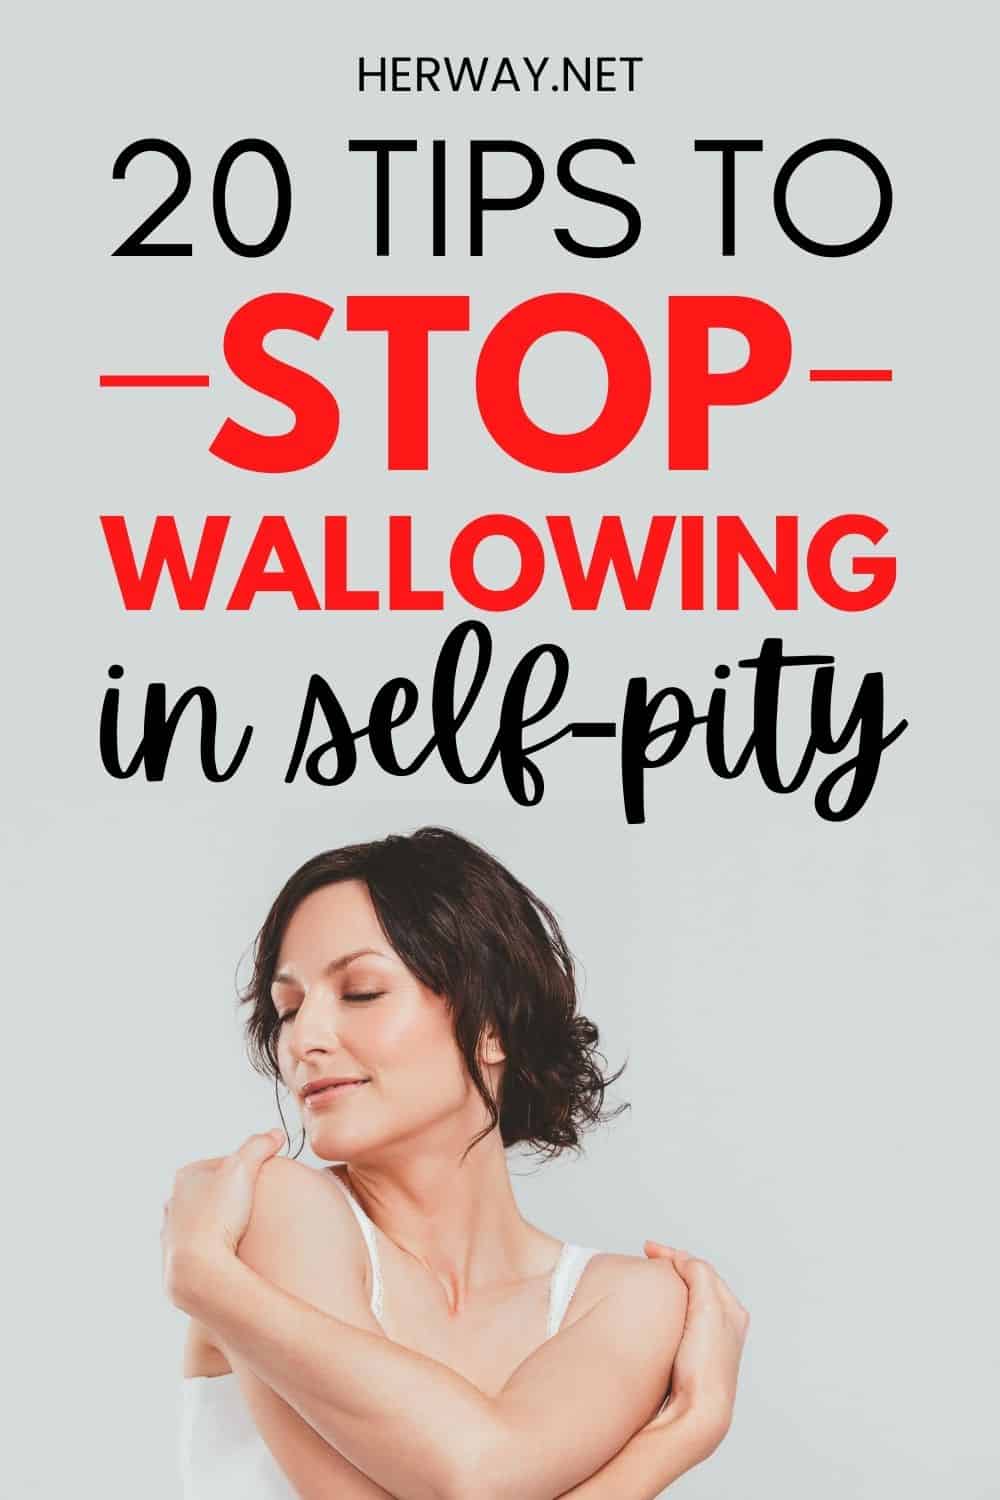 20 Tips To Stop Wallowing In Self-Pity Pinterest